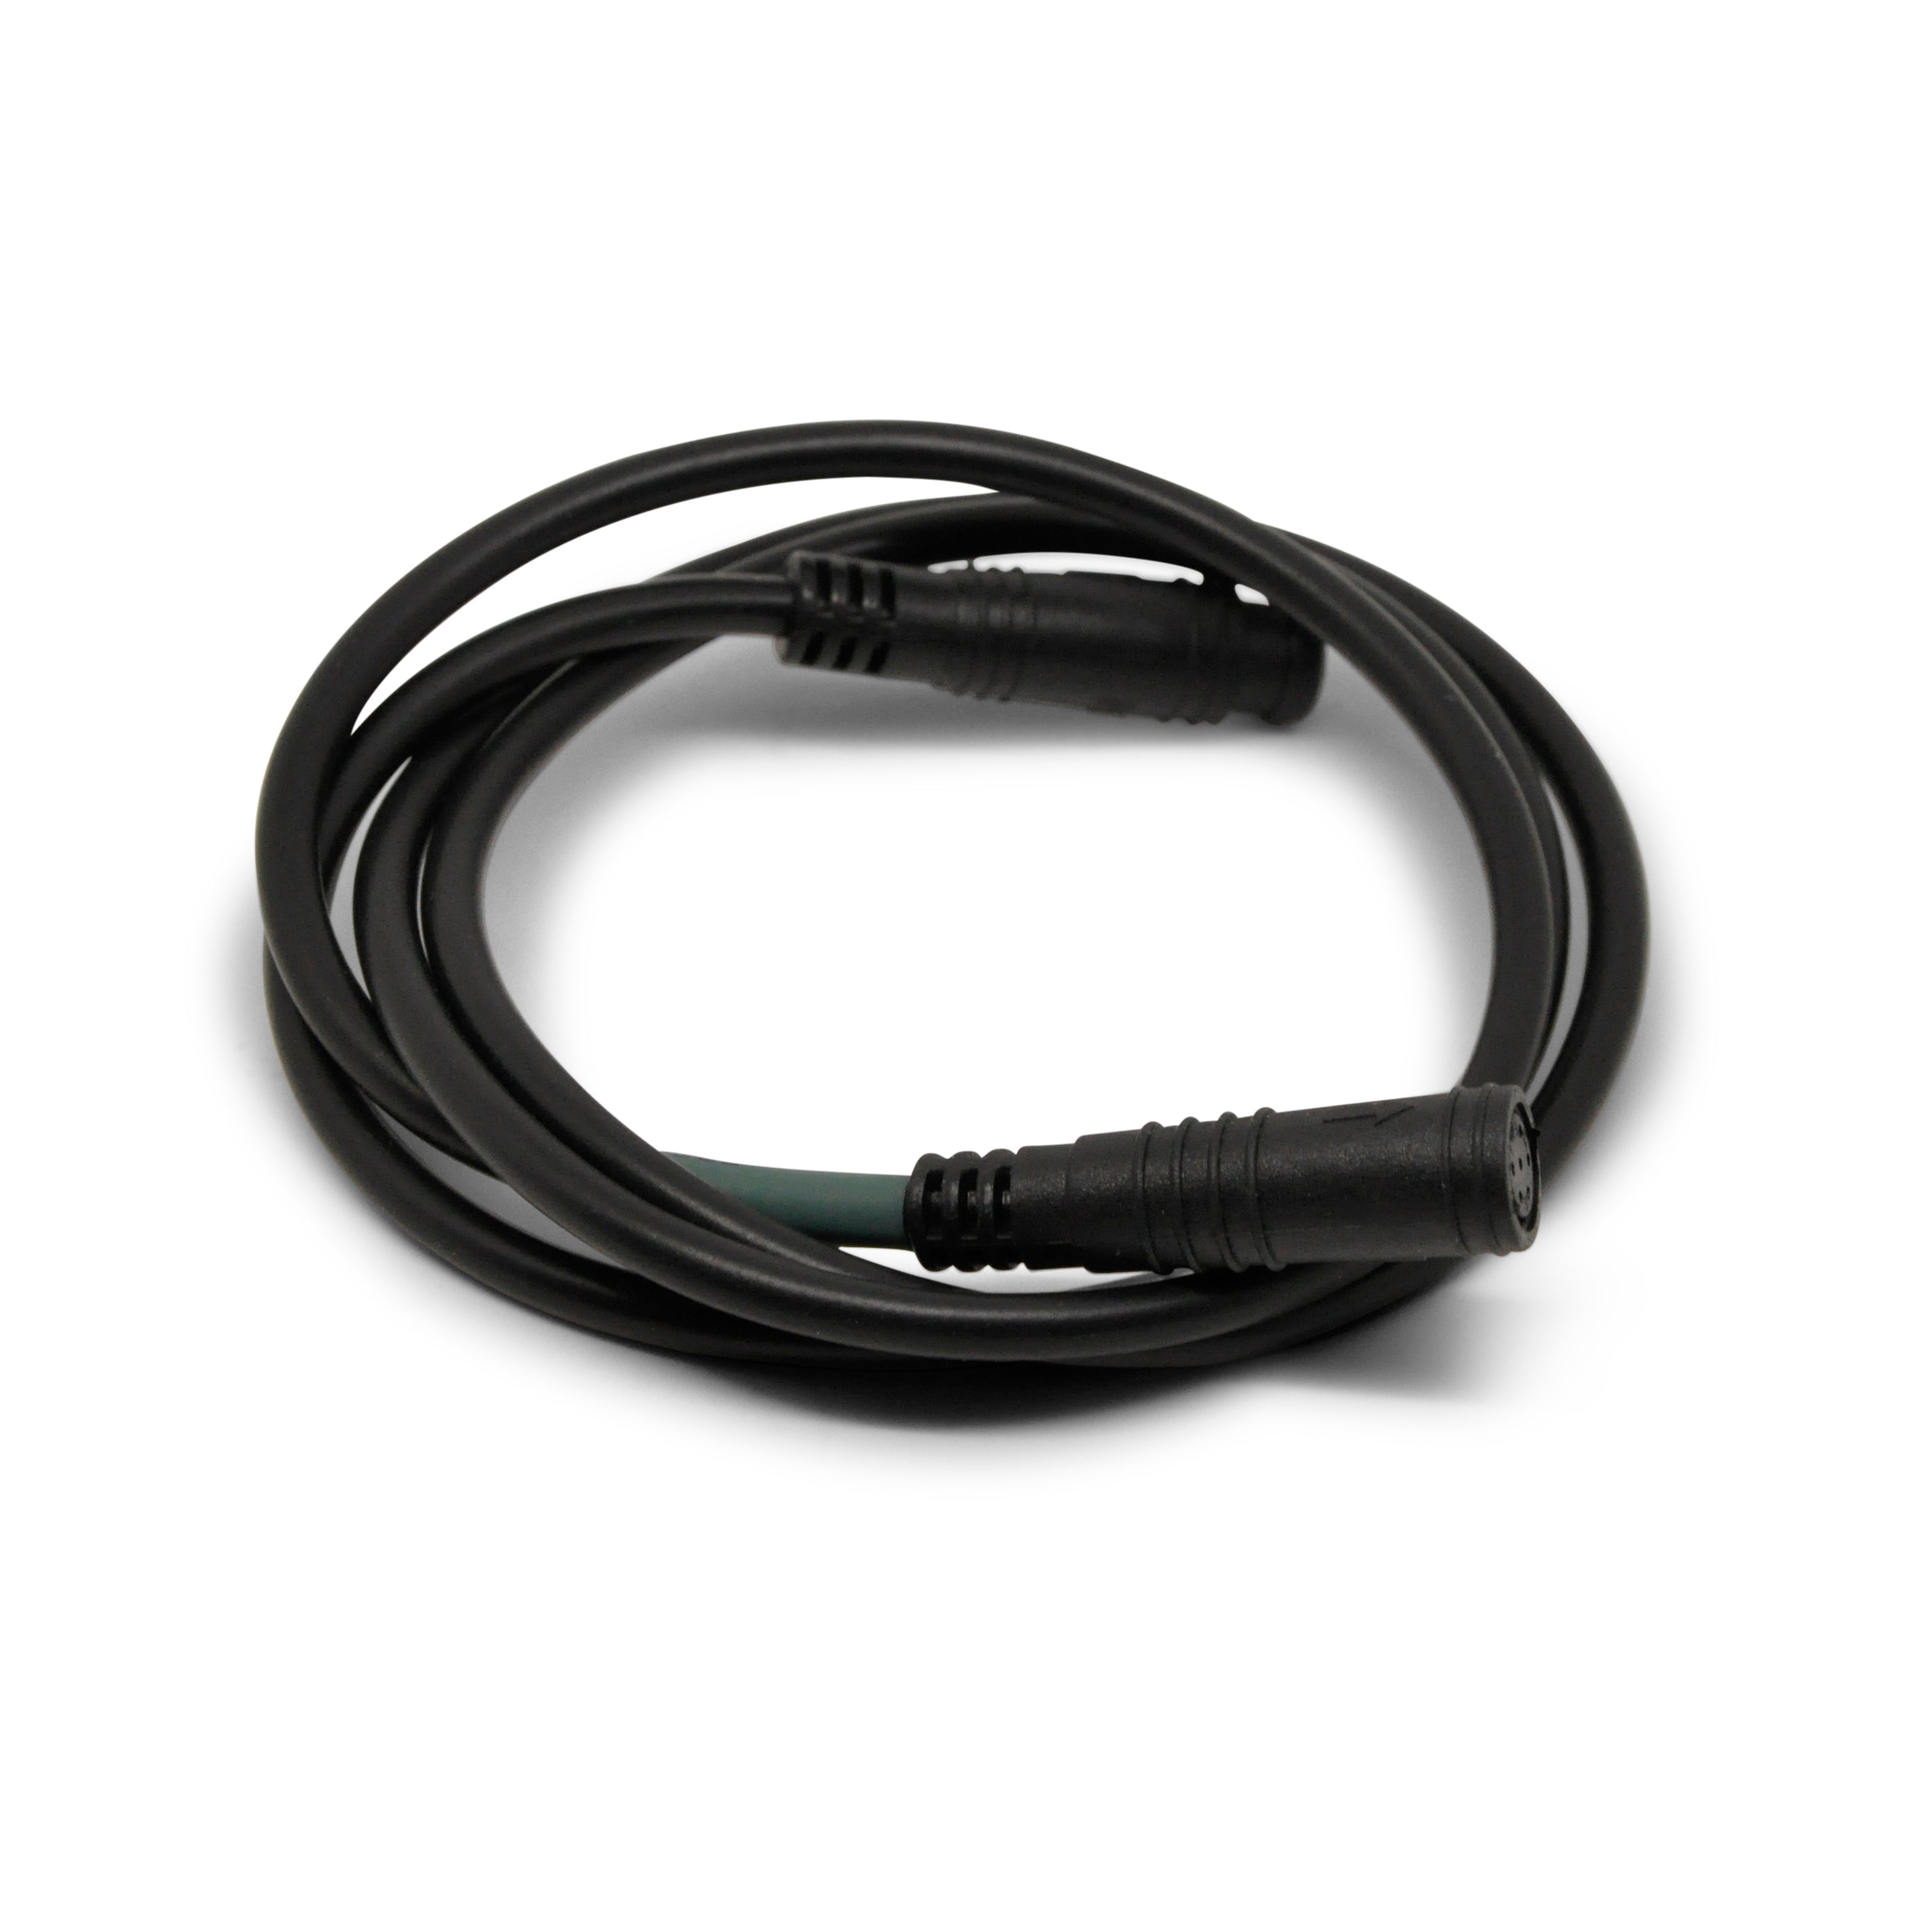 Downtube Extension Cable